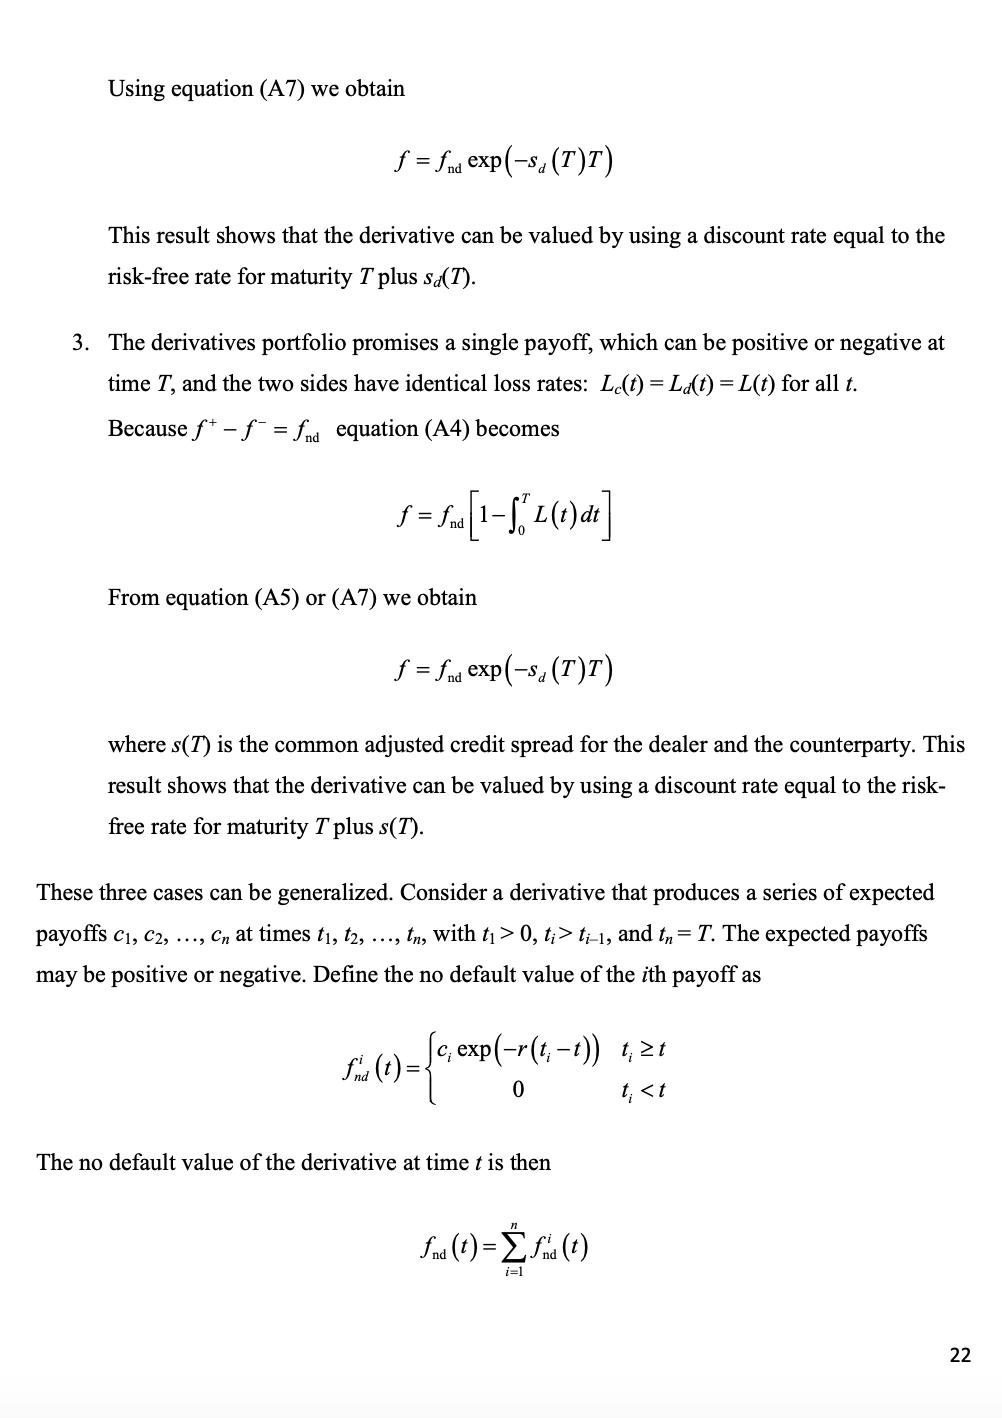 Using equation (A7) we obtain f = fnd exp(-sa This result shows that the derivative can be valued by using a